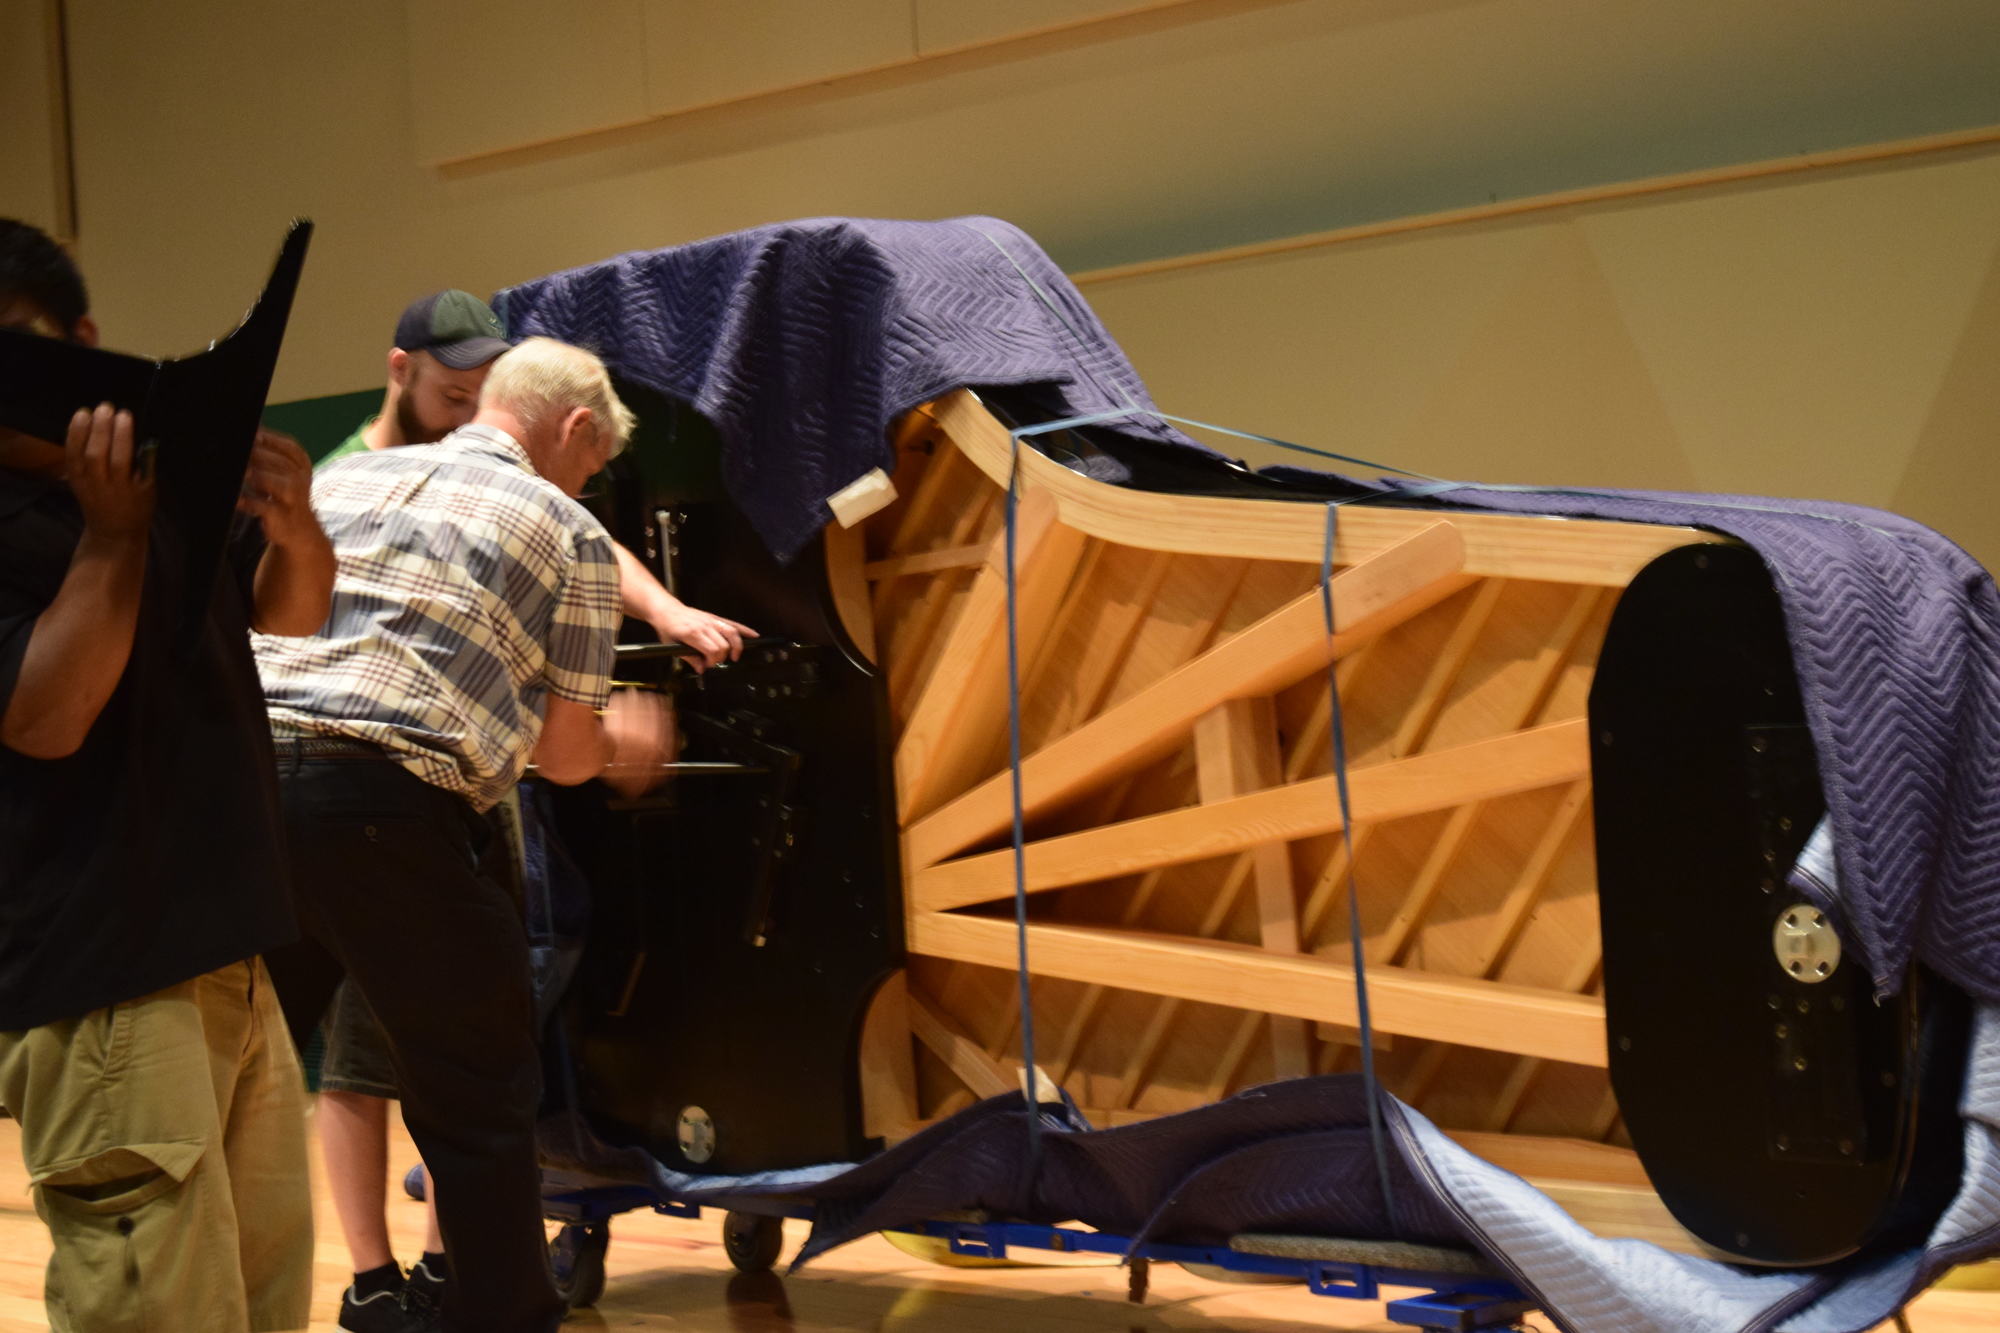 The piano came to Sarasota with its legs detached for safekeeping, so the first step after unwrapping the instrument was to reattach them. Courtesy photo